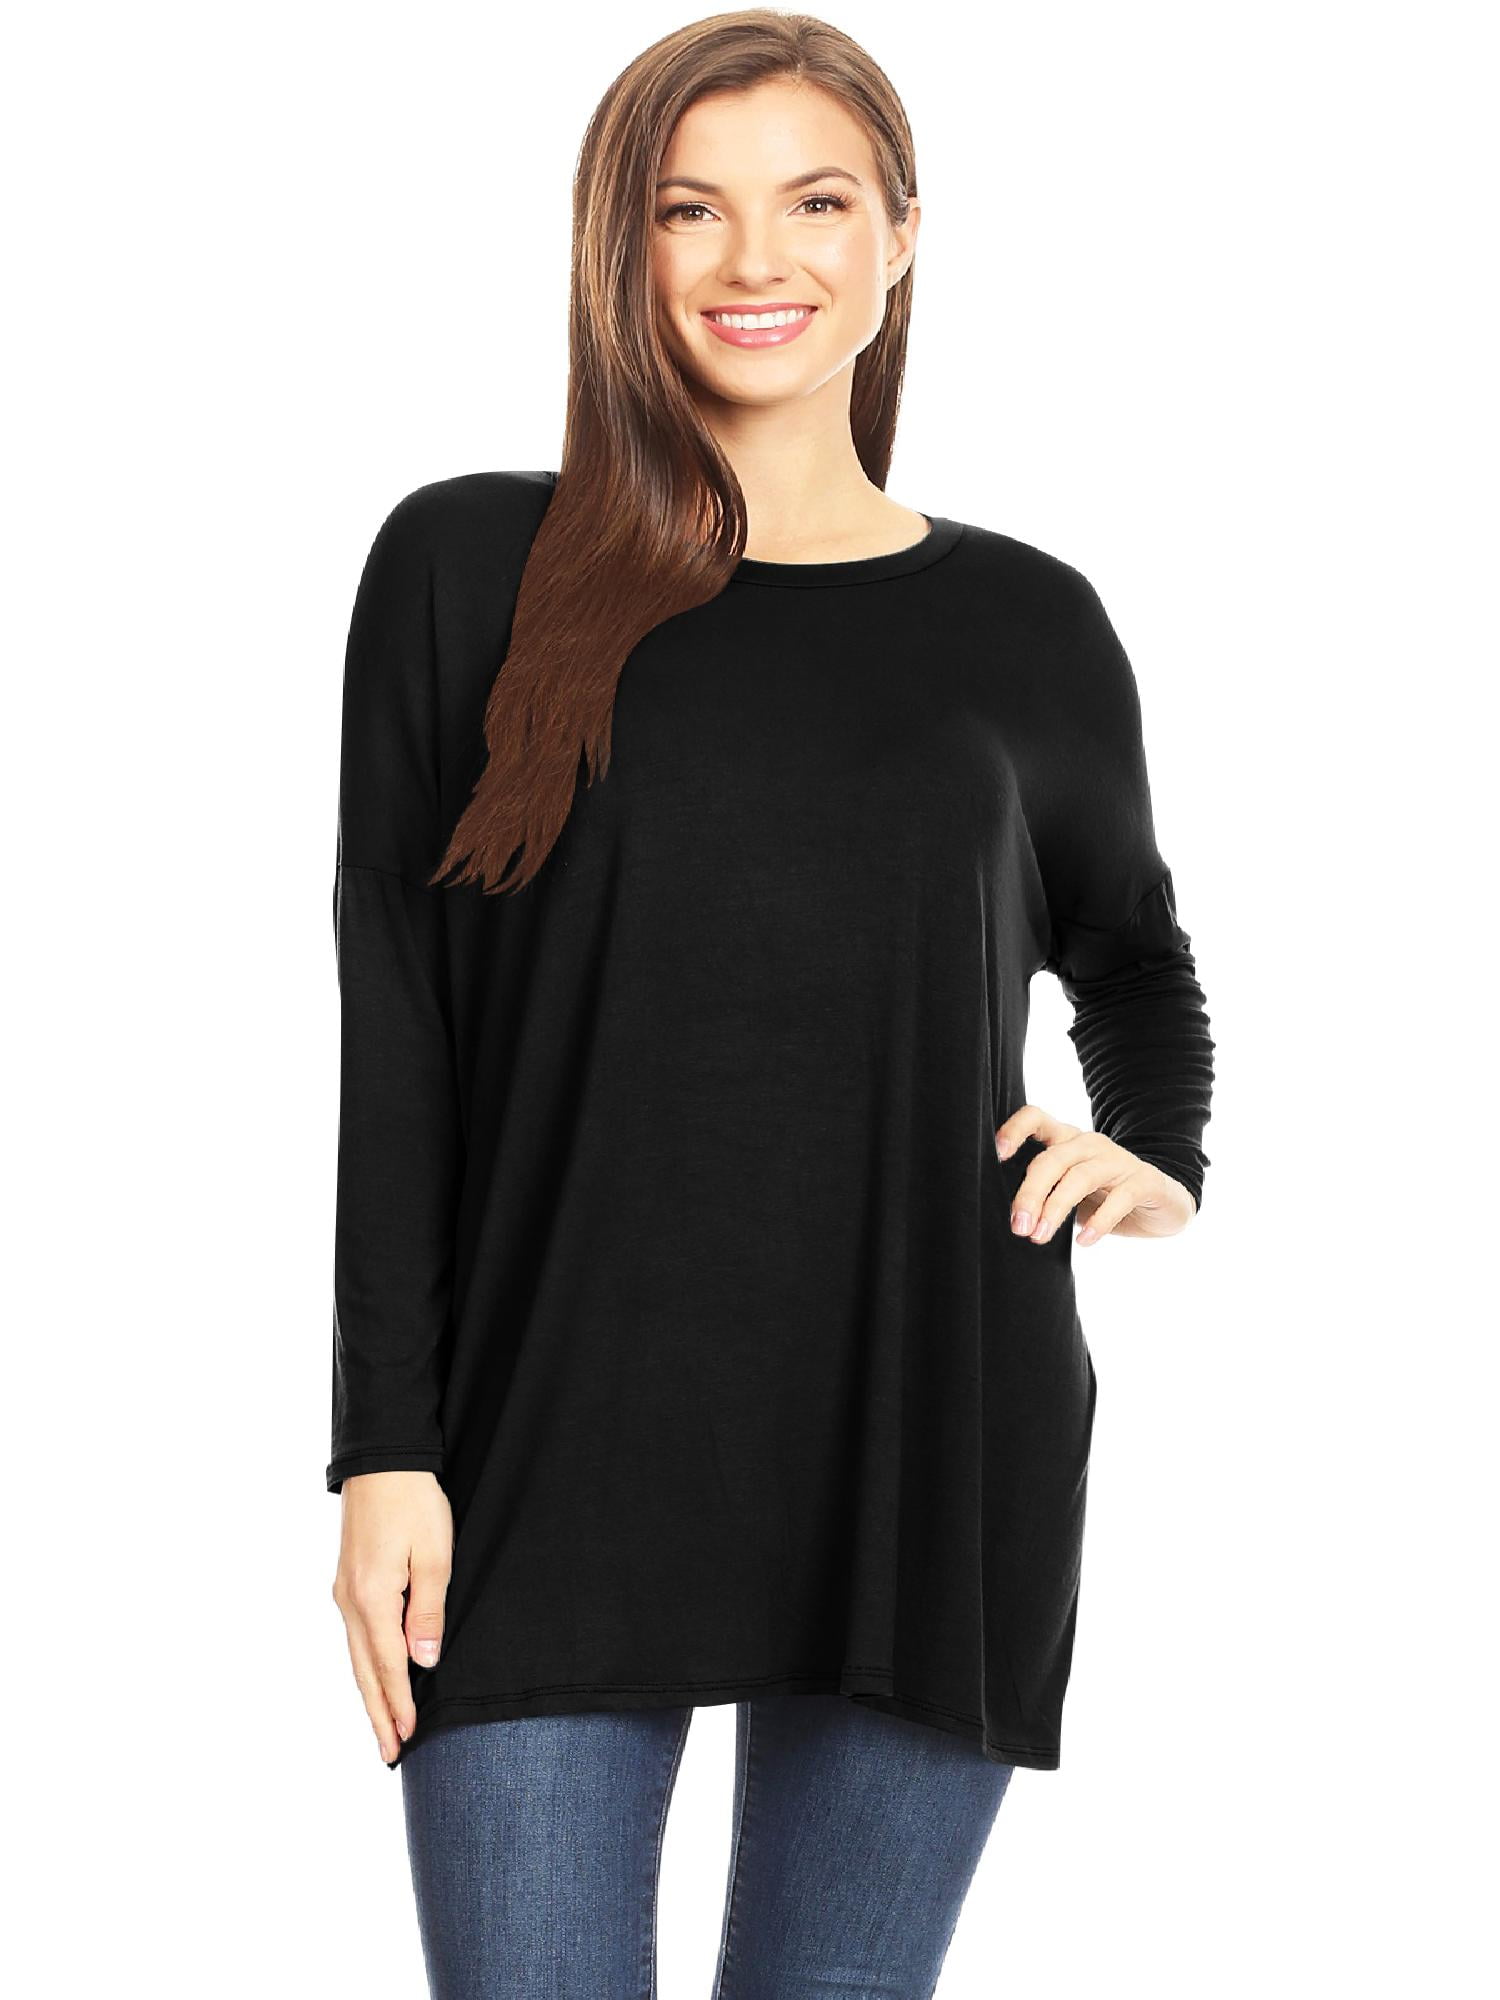 Moa Collection - MOA COLLECTION Women's Solid Casual Basic Dolman Long ...